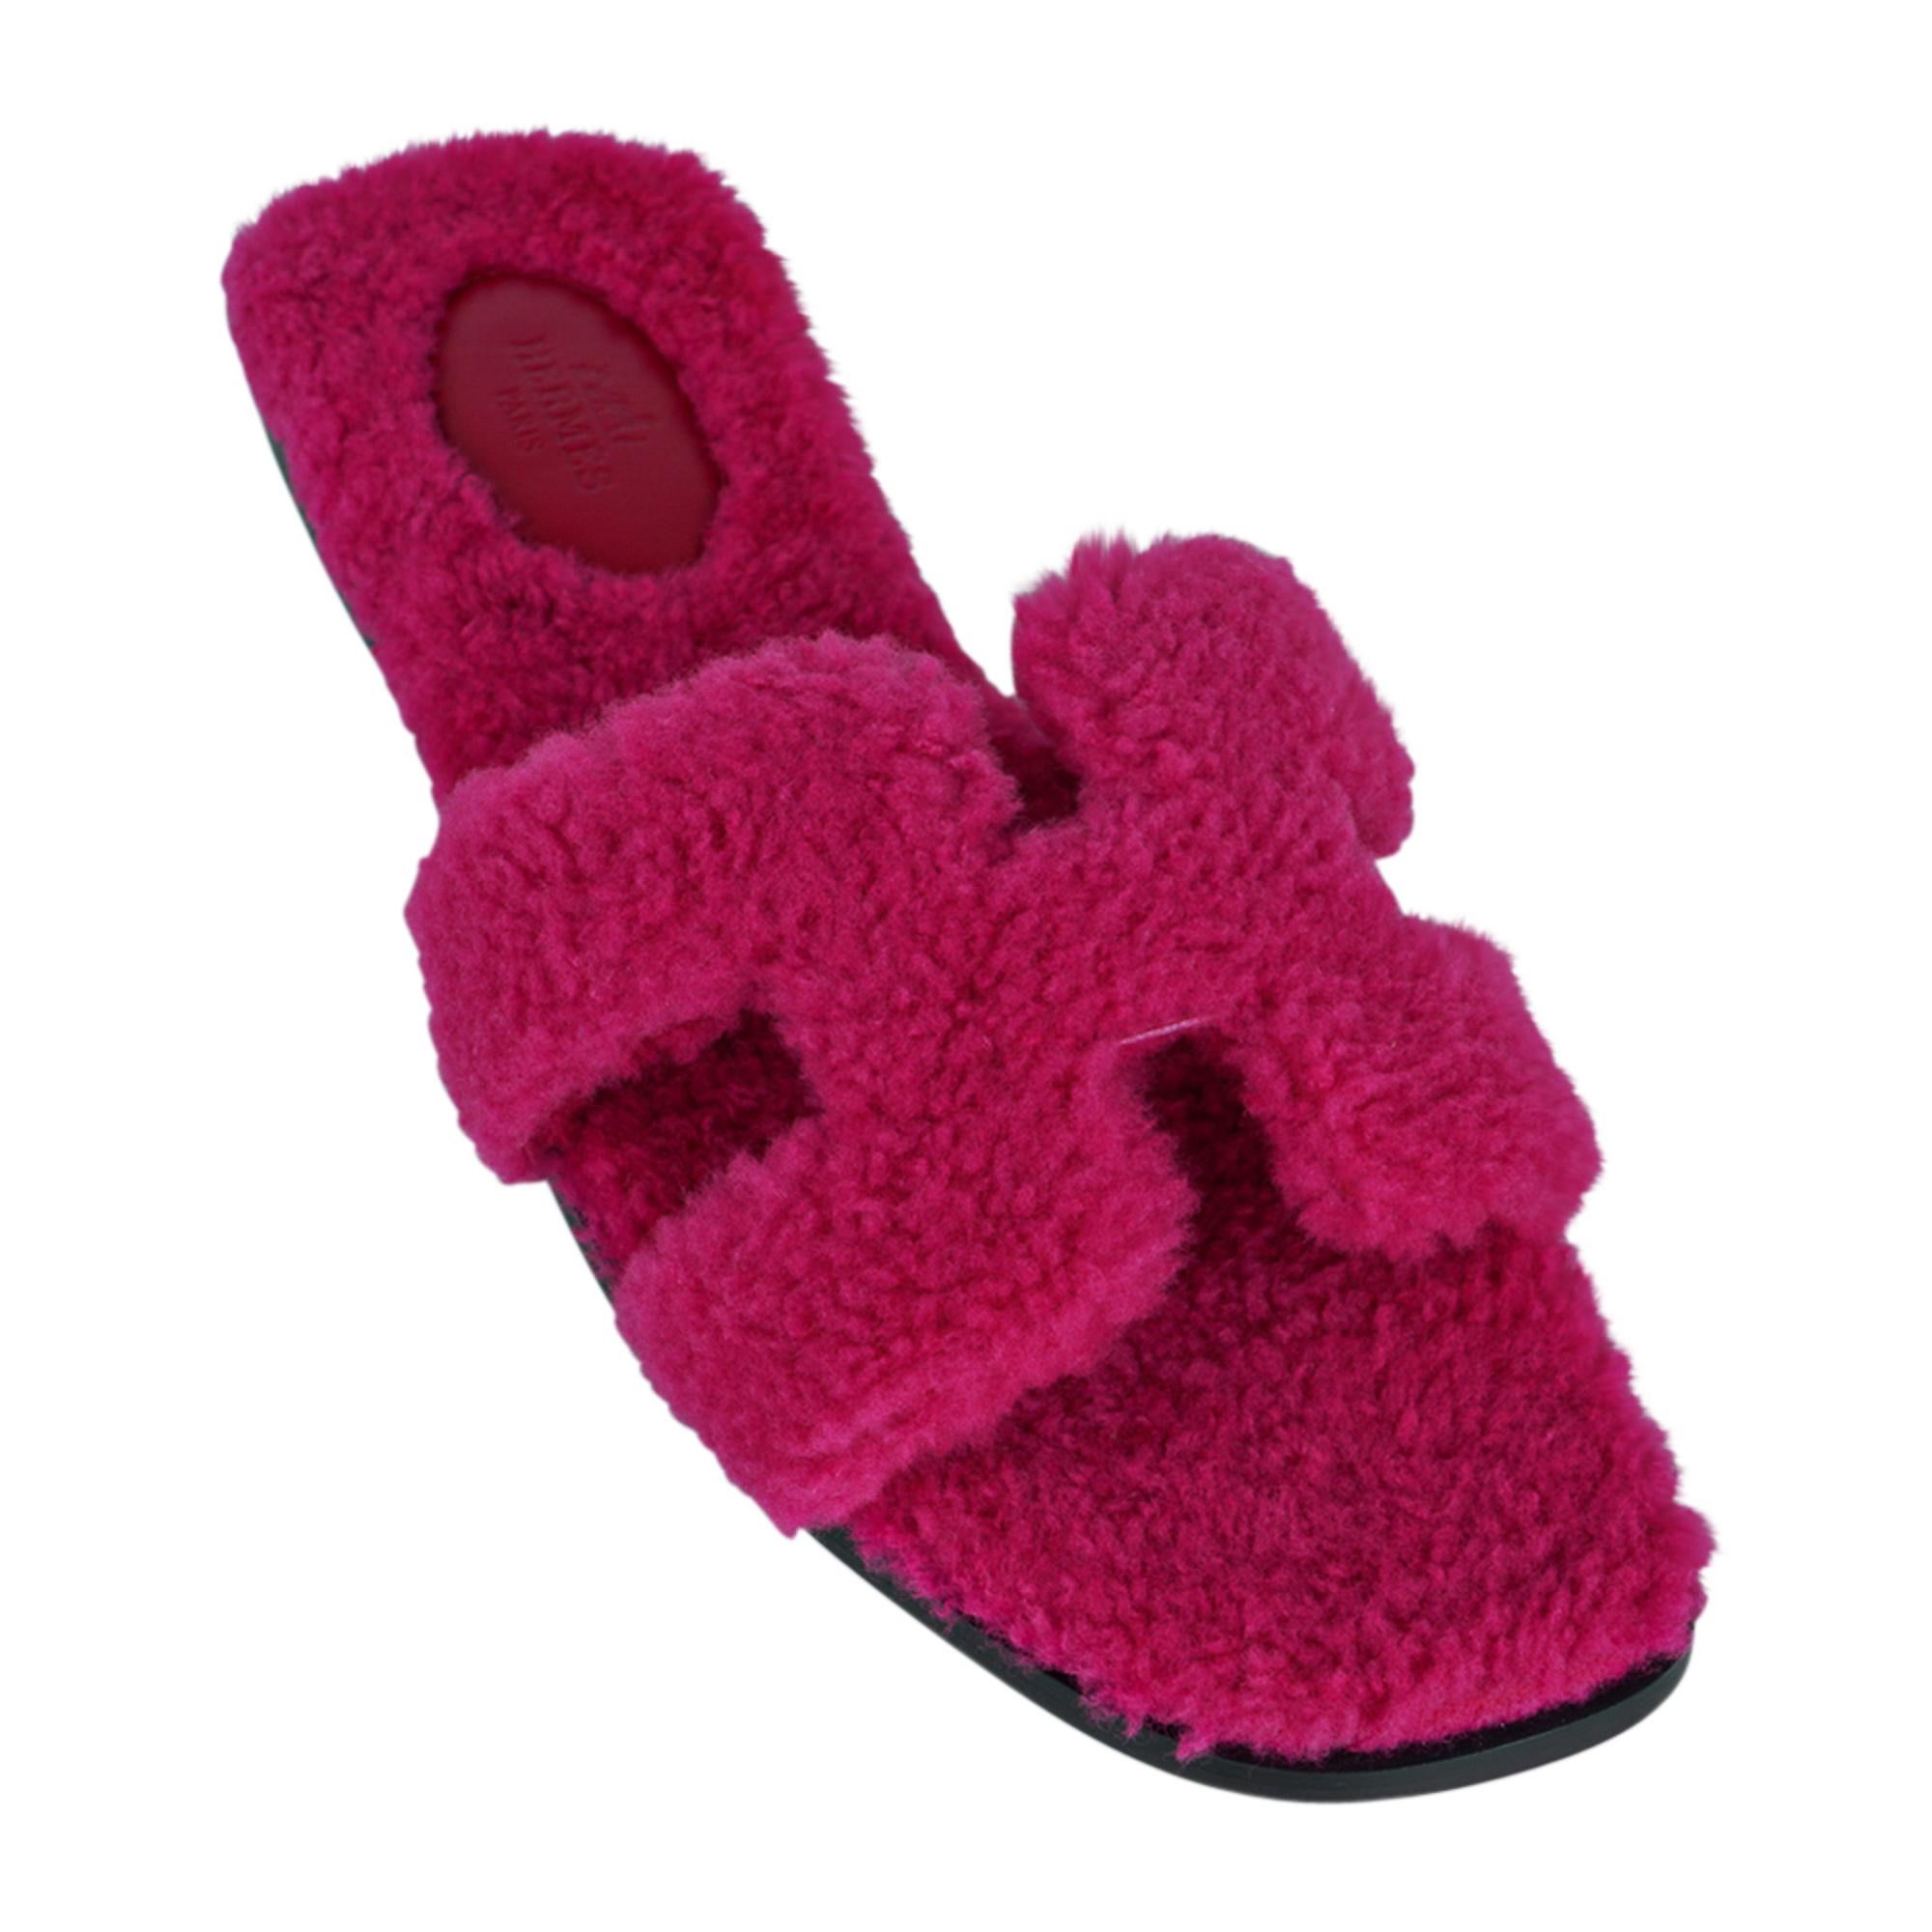 Mightychic offers a guaranteed authentic Hermes Oran Teddy Bear Rose Fuchsia Shearling limited edition flat sandal slide.
Featured in saturated Fuchsia this limited edition Hermes Oran sandal is foot flirting perfection!
Embossed Hermes Paris